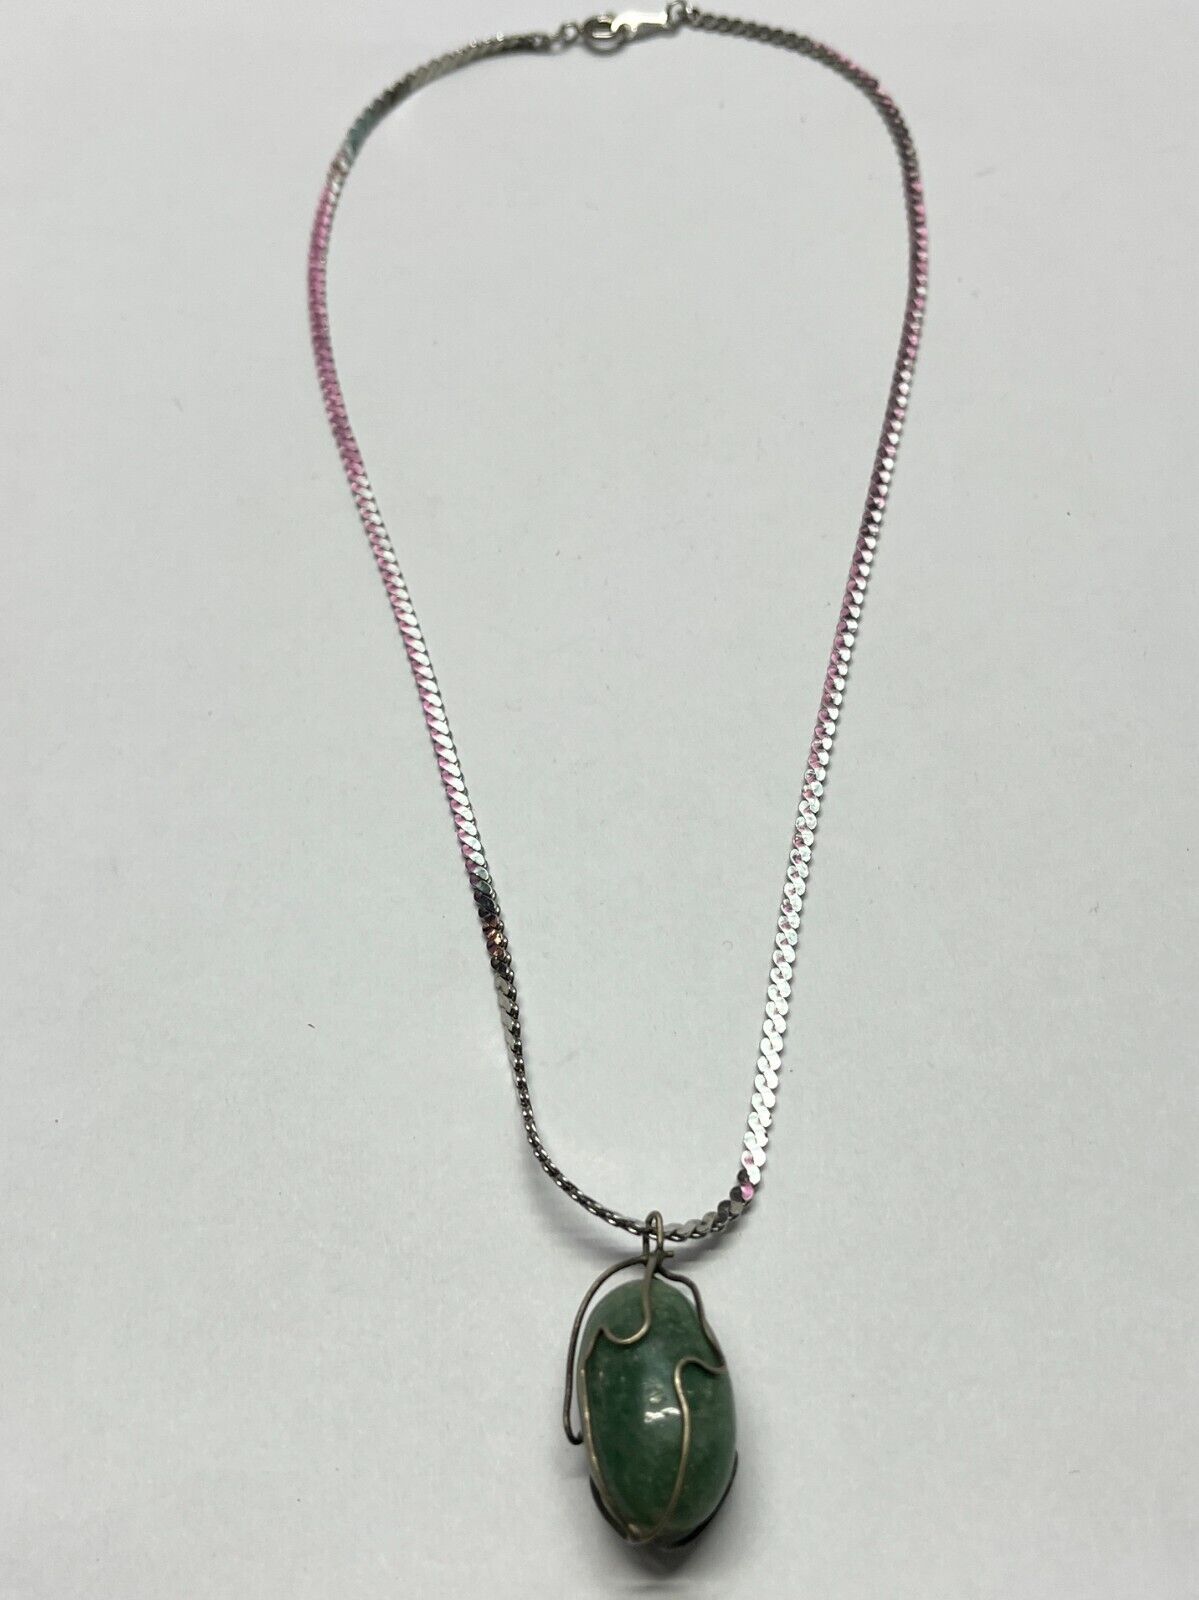 Vintage green stone silver necklace - image 3